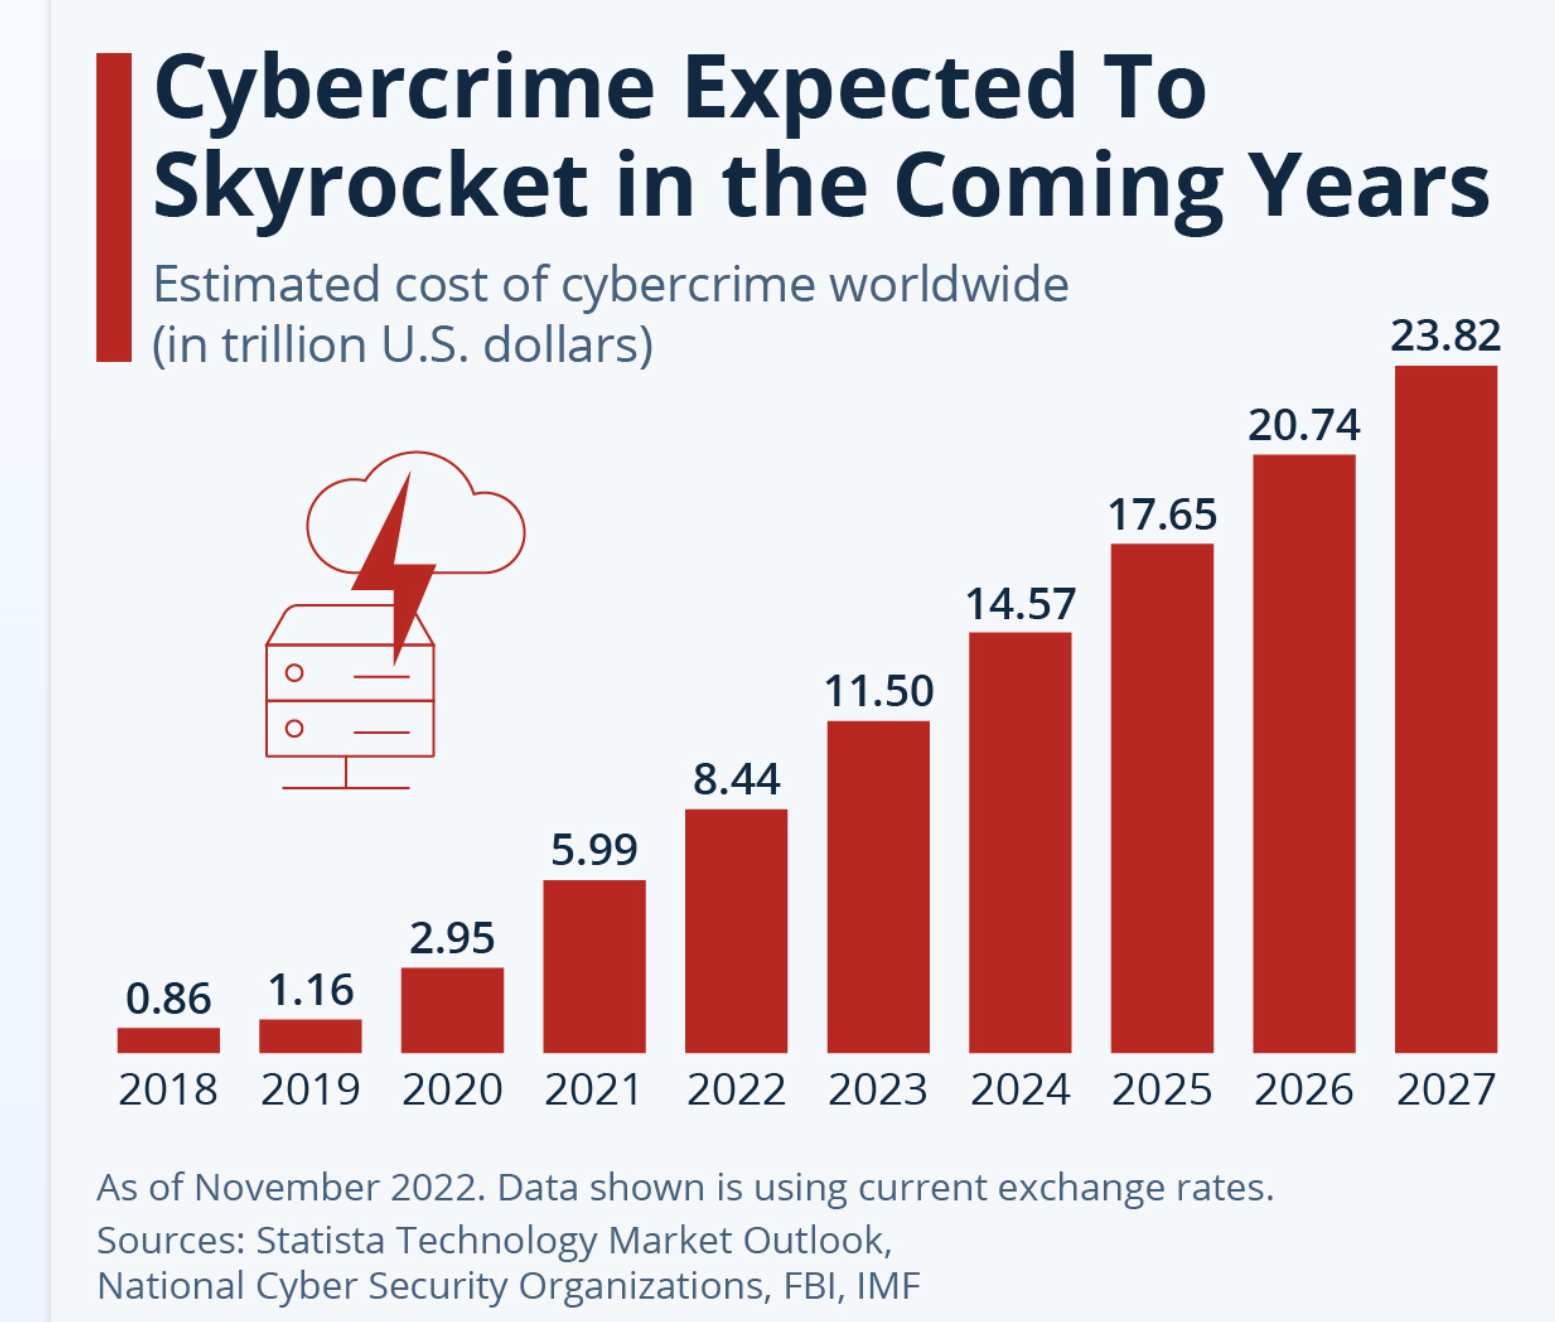 Cybercrime in the coming years